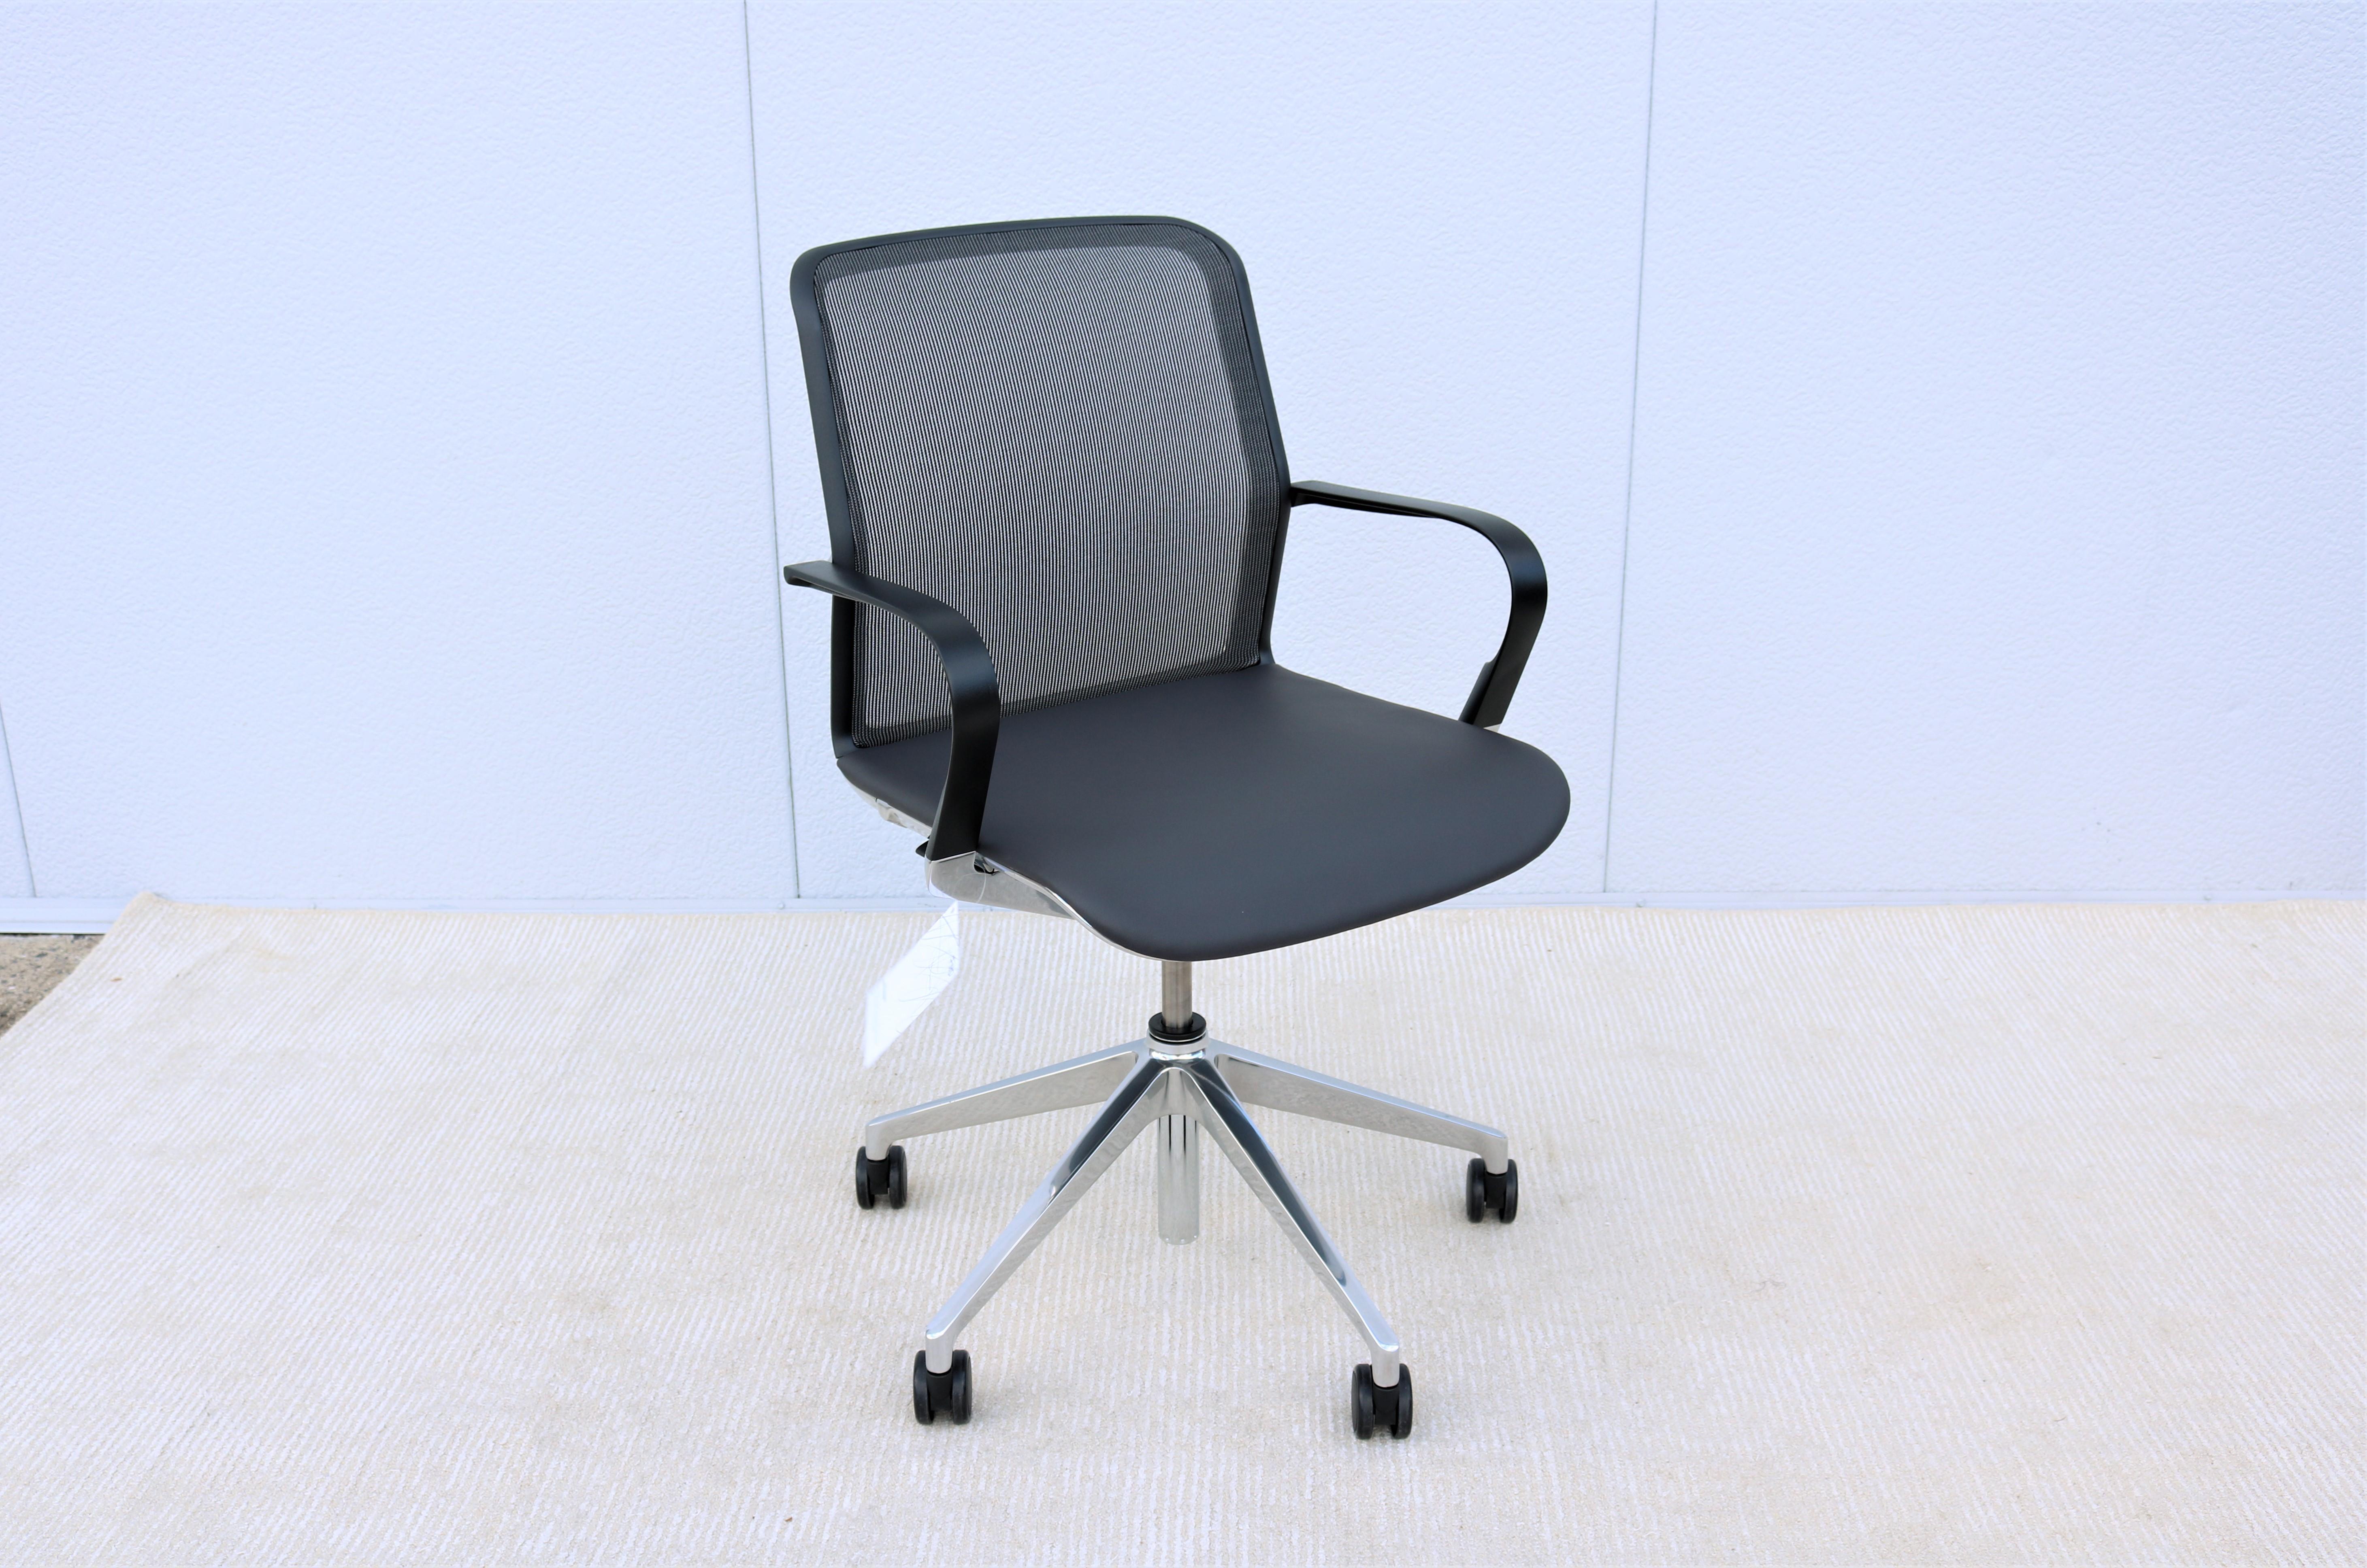 The ergonomic Filo mesh back conference chair designed by EOOS for Keilhauer successfully combines comfort, technology and elegant. 
Features soft seat and supportive breathable backrest mesh allows air to circulate and offers sustained